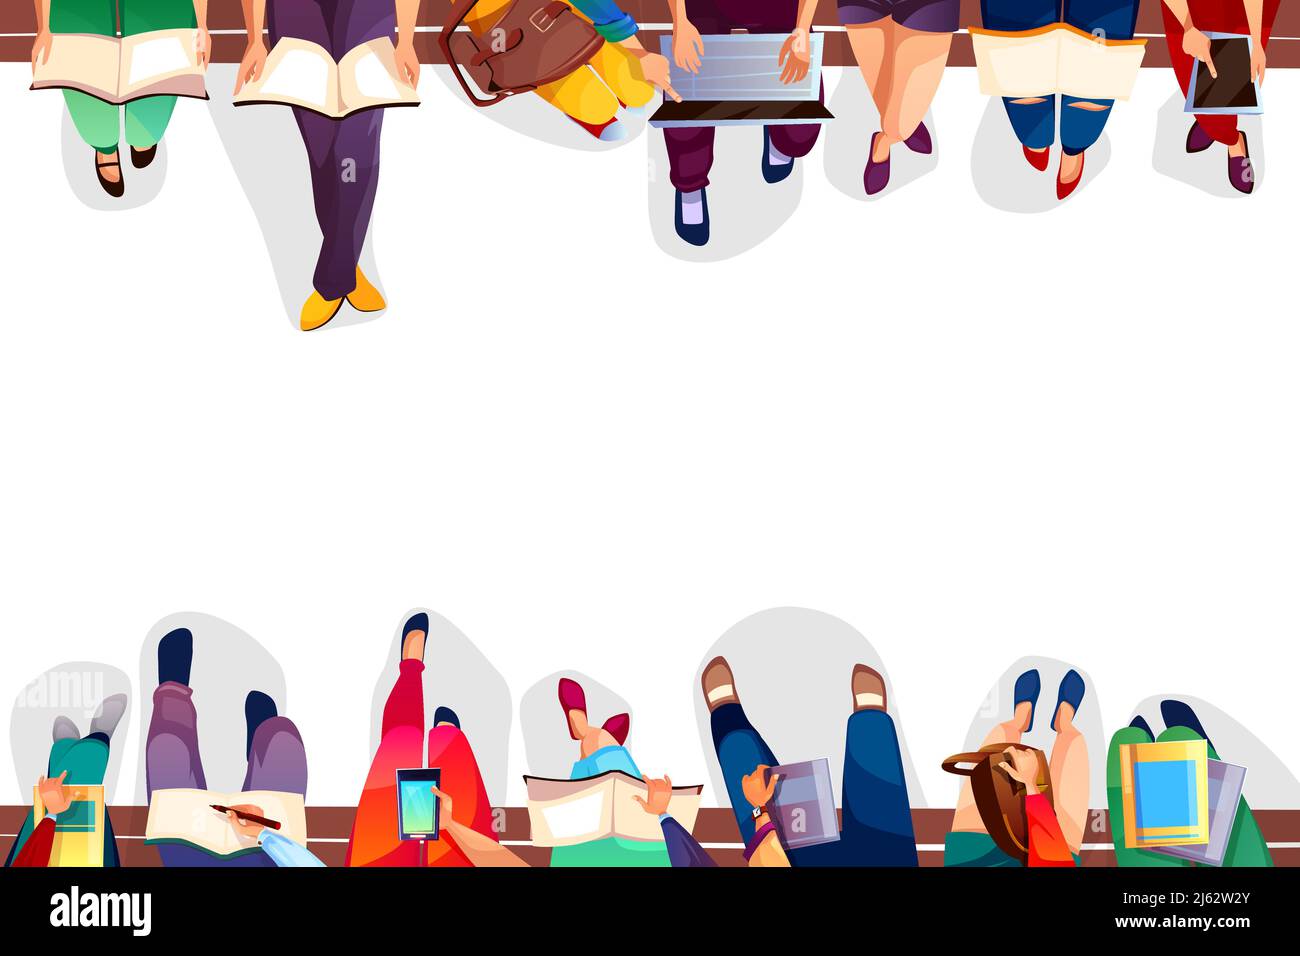 College students sitting on bench vector illustration of university girls and boys with bags, laptops or smartphones and books. Legs top view on white Stock Vector